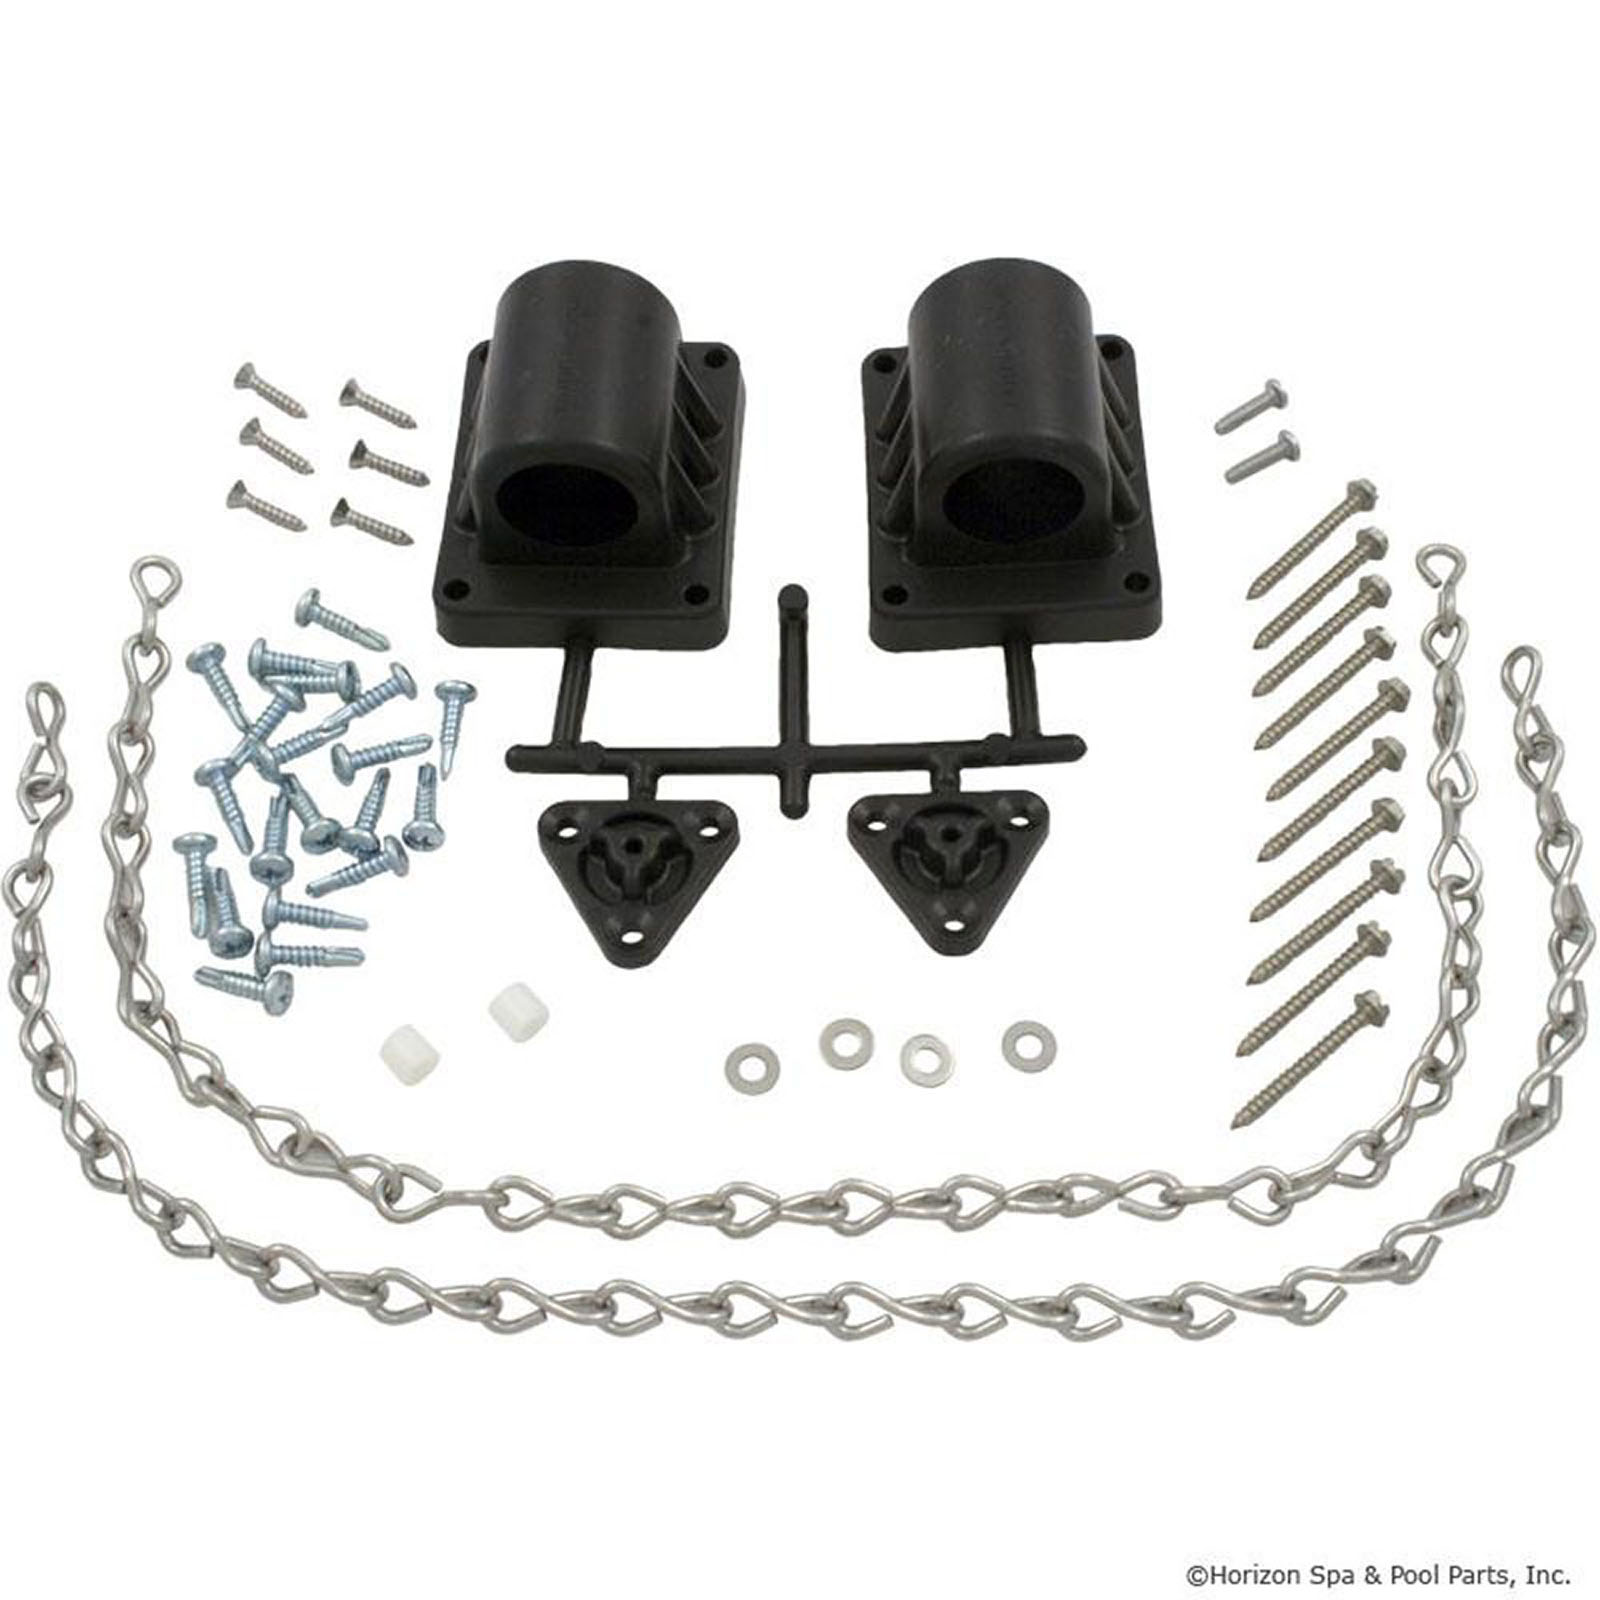 Picture of 3110-03 Cover Hardware Kit E-Z Lifter